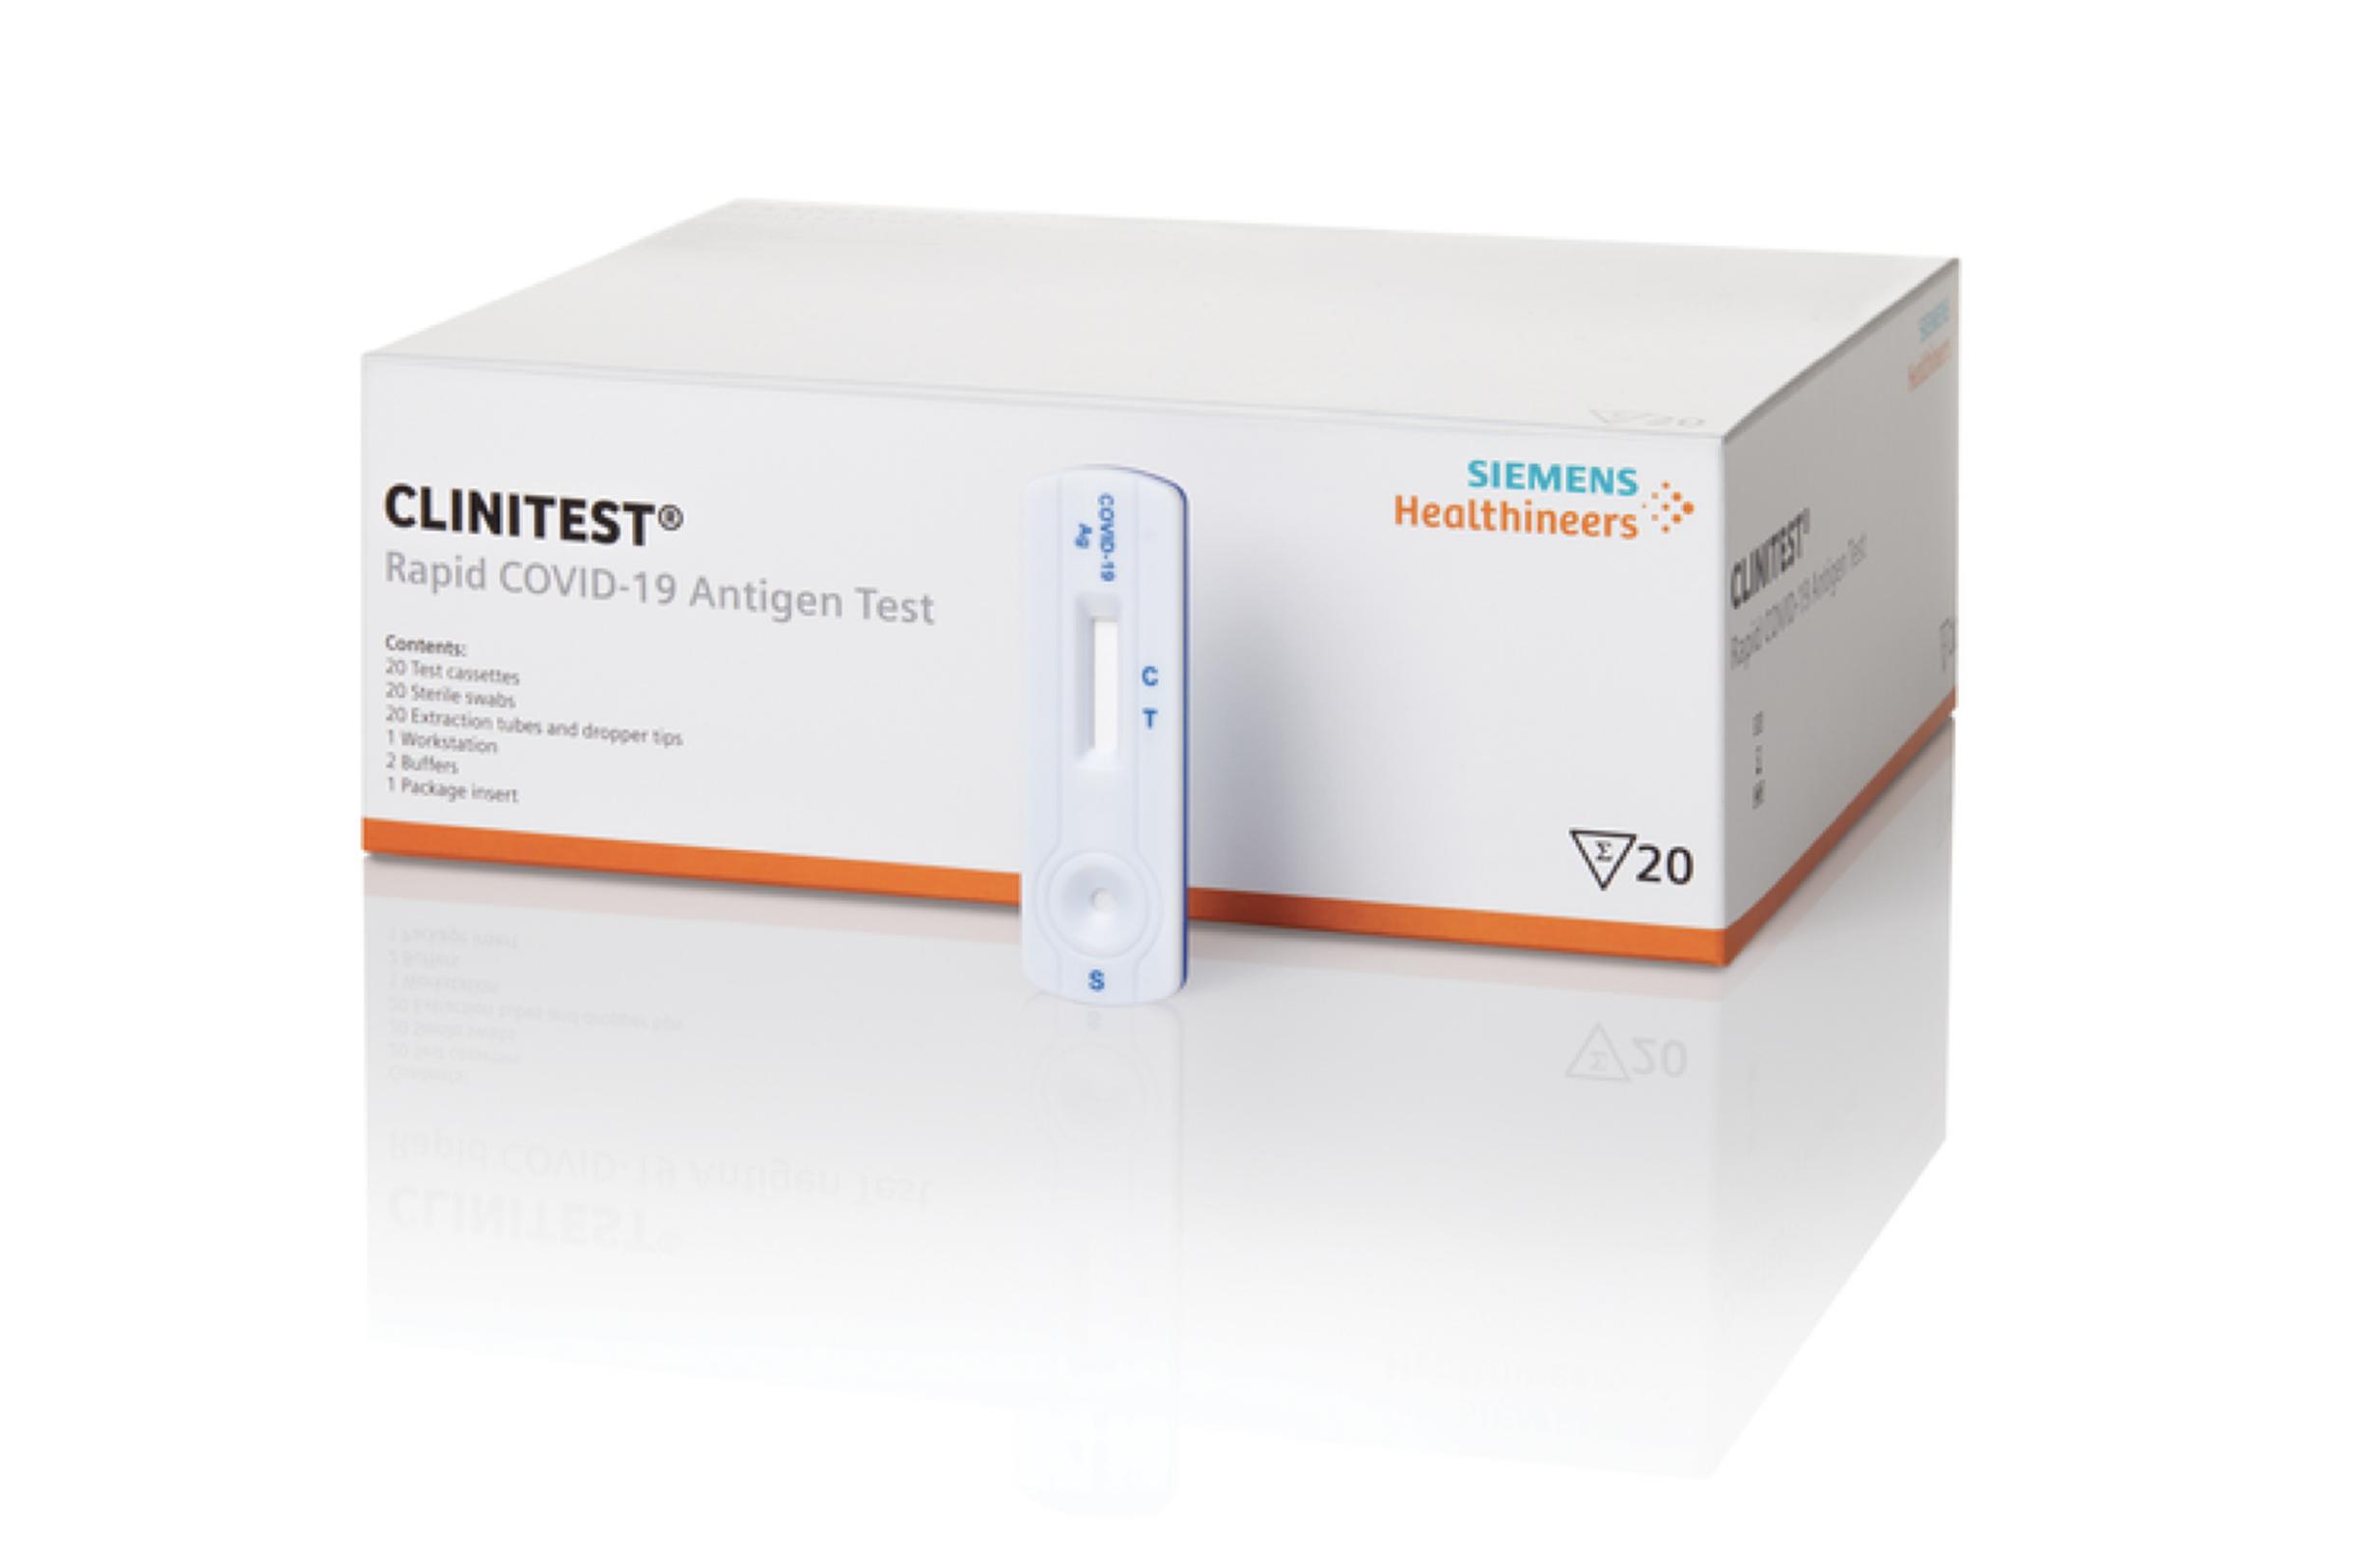 The CLINITEST Rapid COVID-19 Antigen Test, distributed by Siemens Healthineers has achieved CE Mark – offering easier specimen collection from the frontal part of the nose